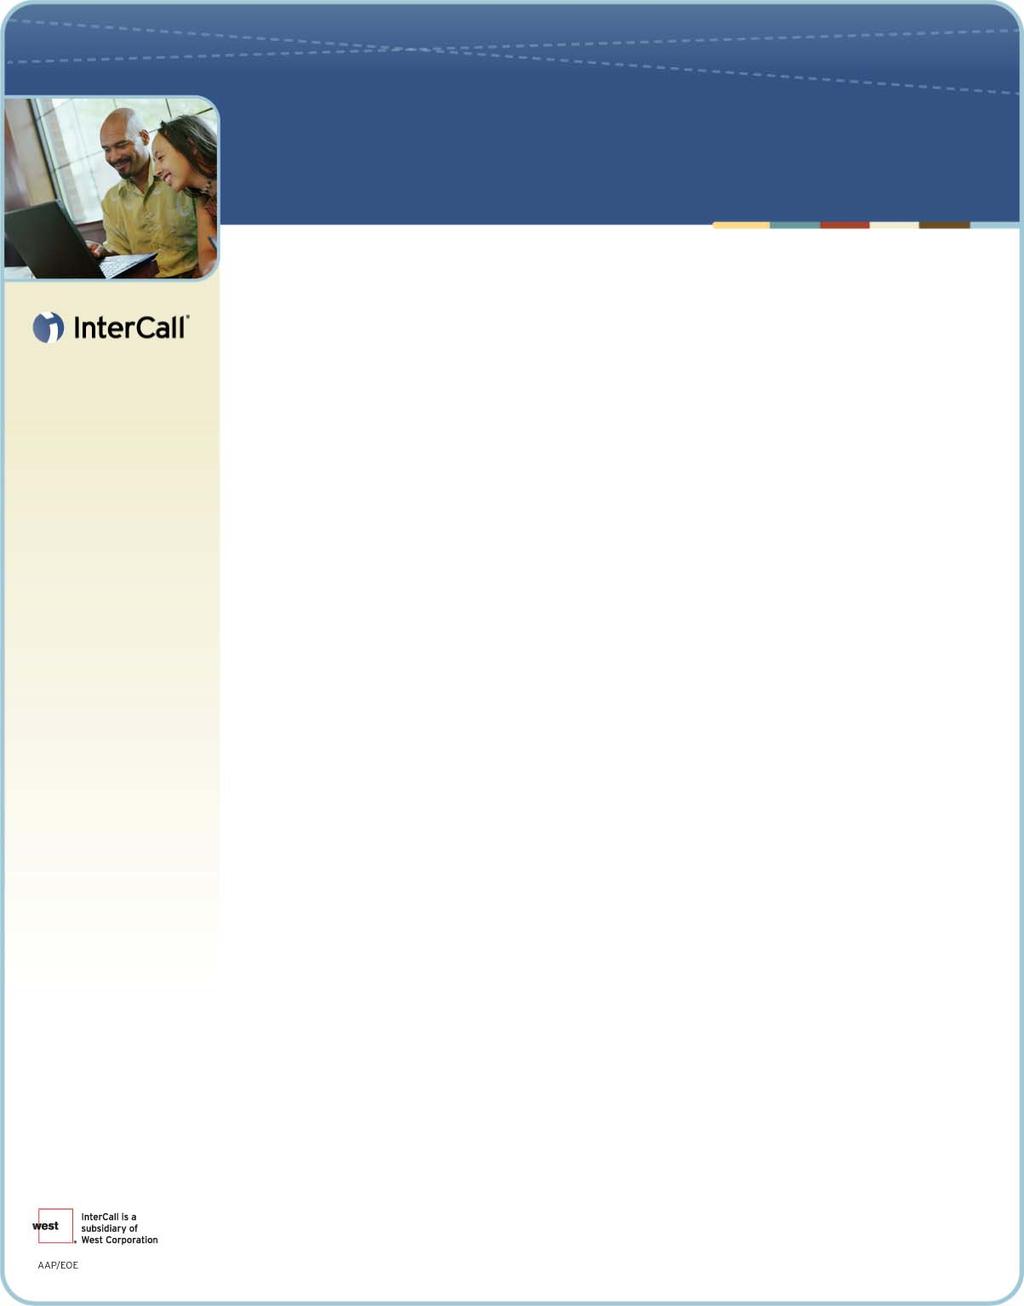 WebEx TM Recorder and Player User's Guide for MeetingCenter TM InterCall, a subsidiary of West Corporation, in partnership with WebEx Communications, Inc provides MeetingCenter web conferencing